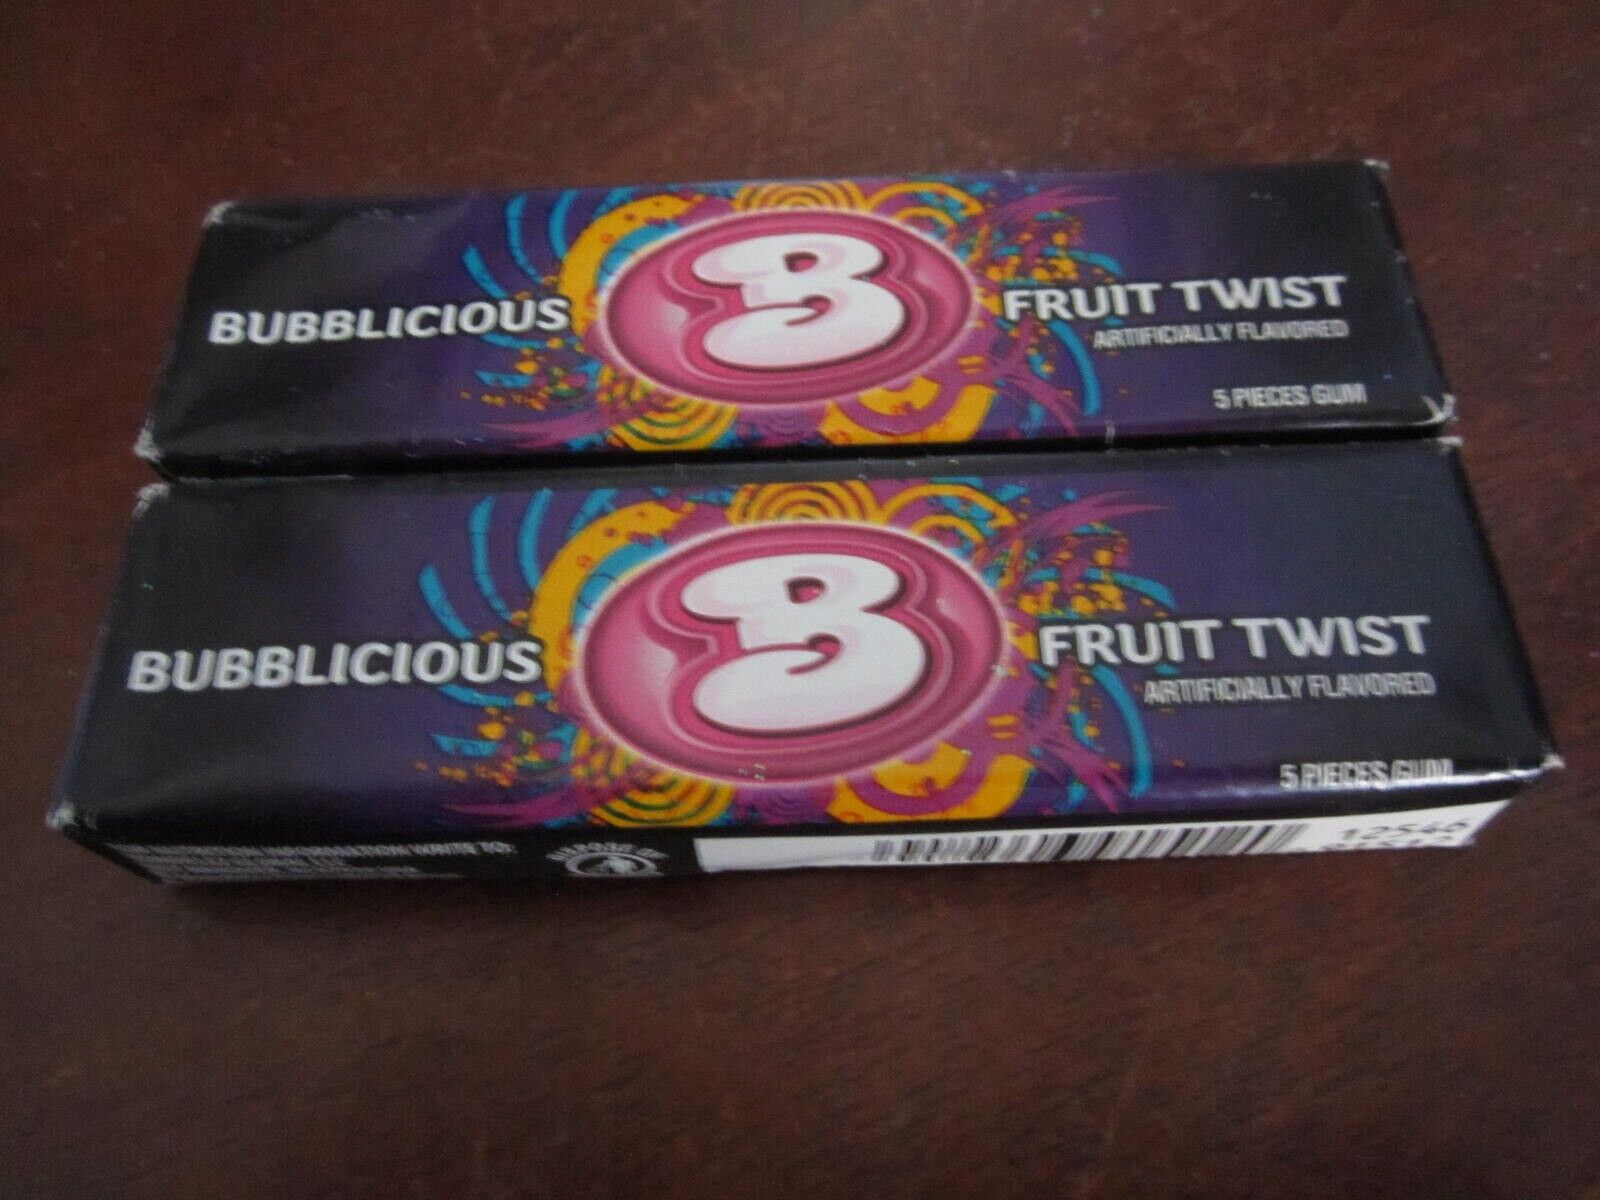 Extremely RARE Fruit Twist Hubba Bubba Bubblicious Gum, 2 Sealed Collector Packs